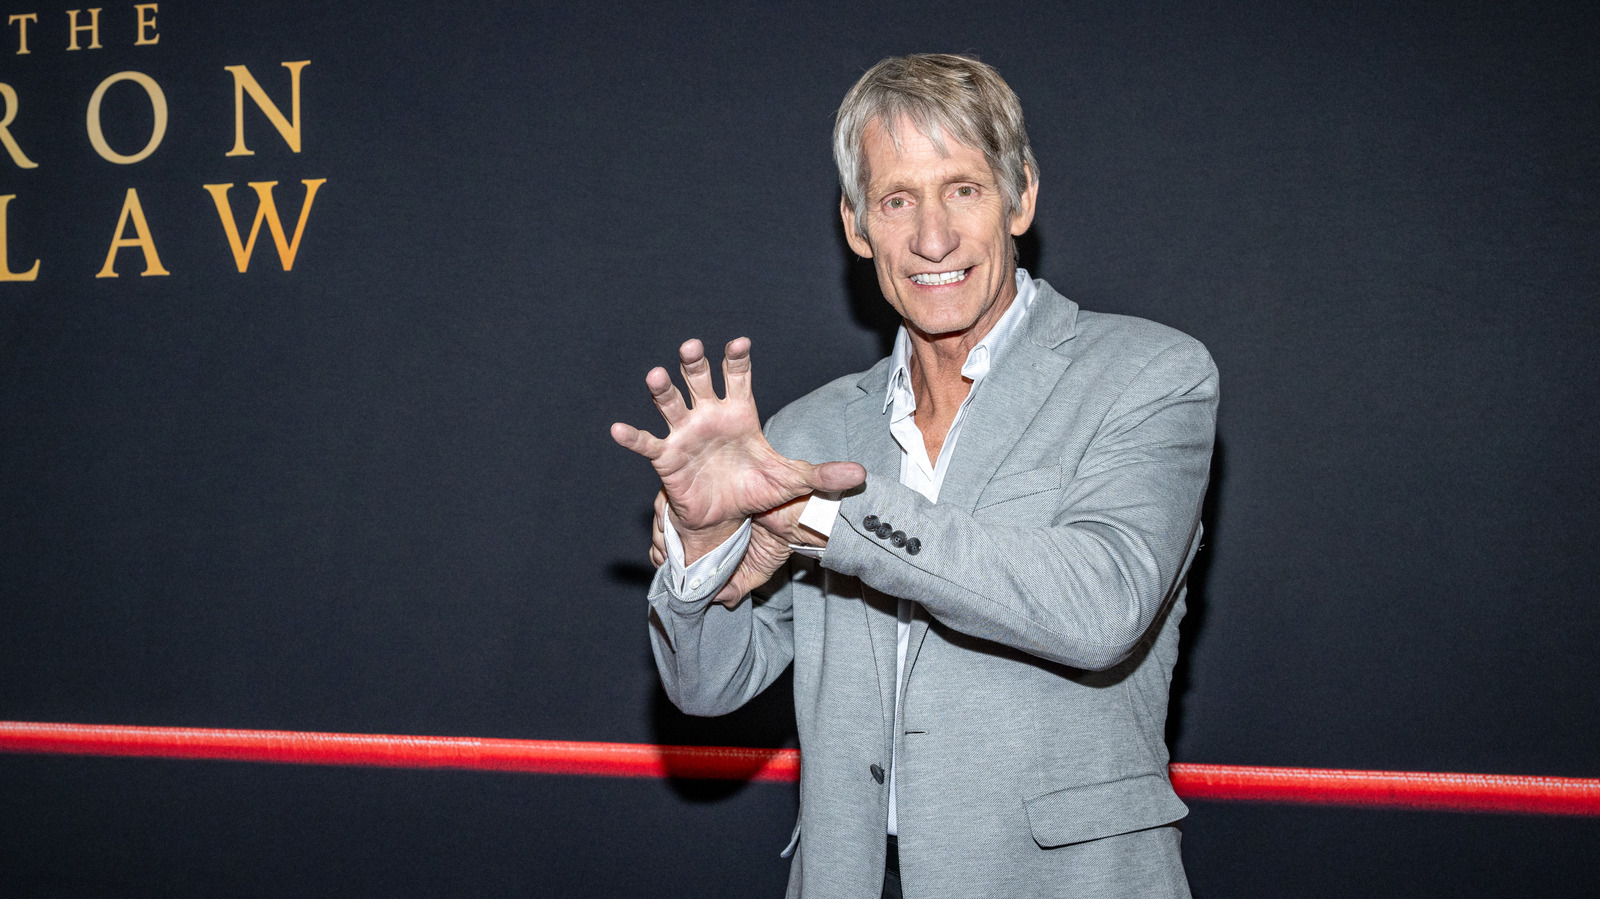 Kevin Von Erich On The Hazards Of Pro Wrestling Making You 'Bigger Than Life'